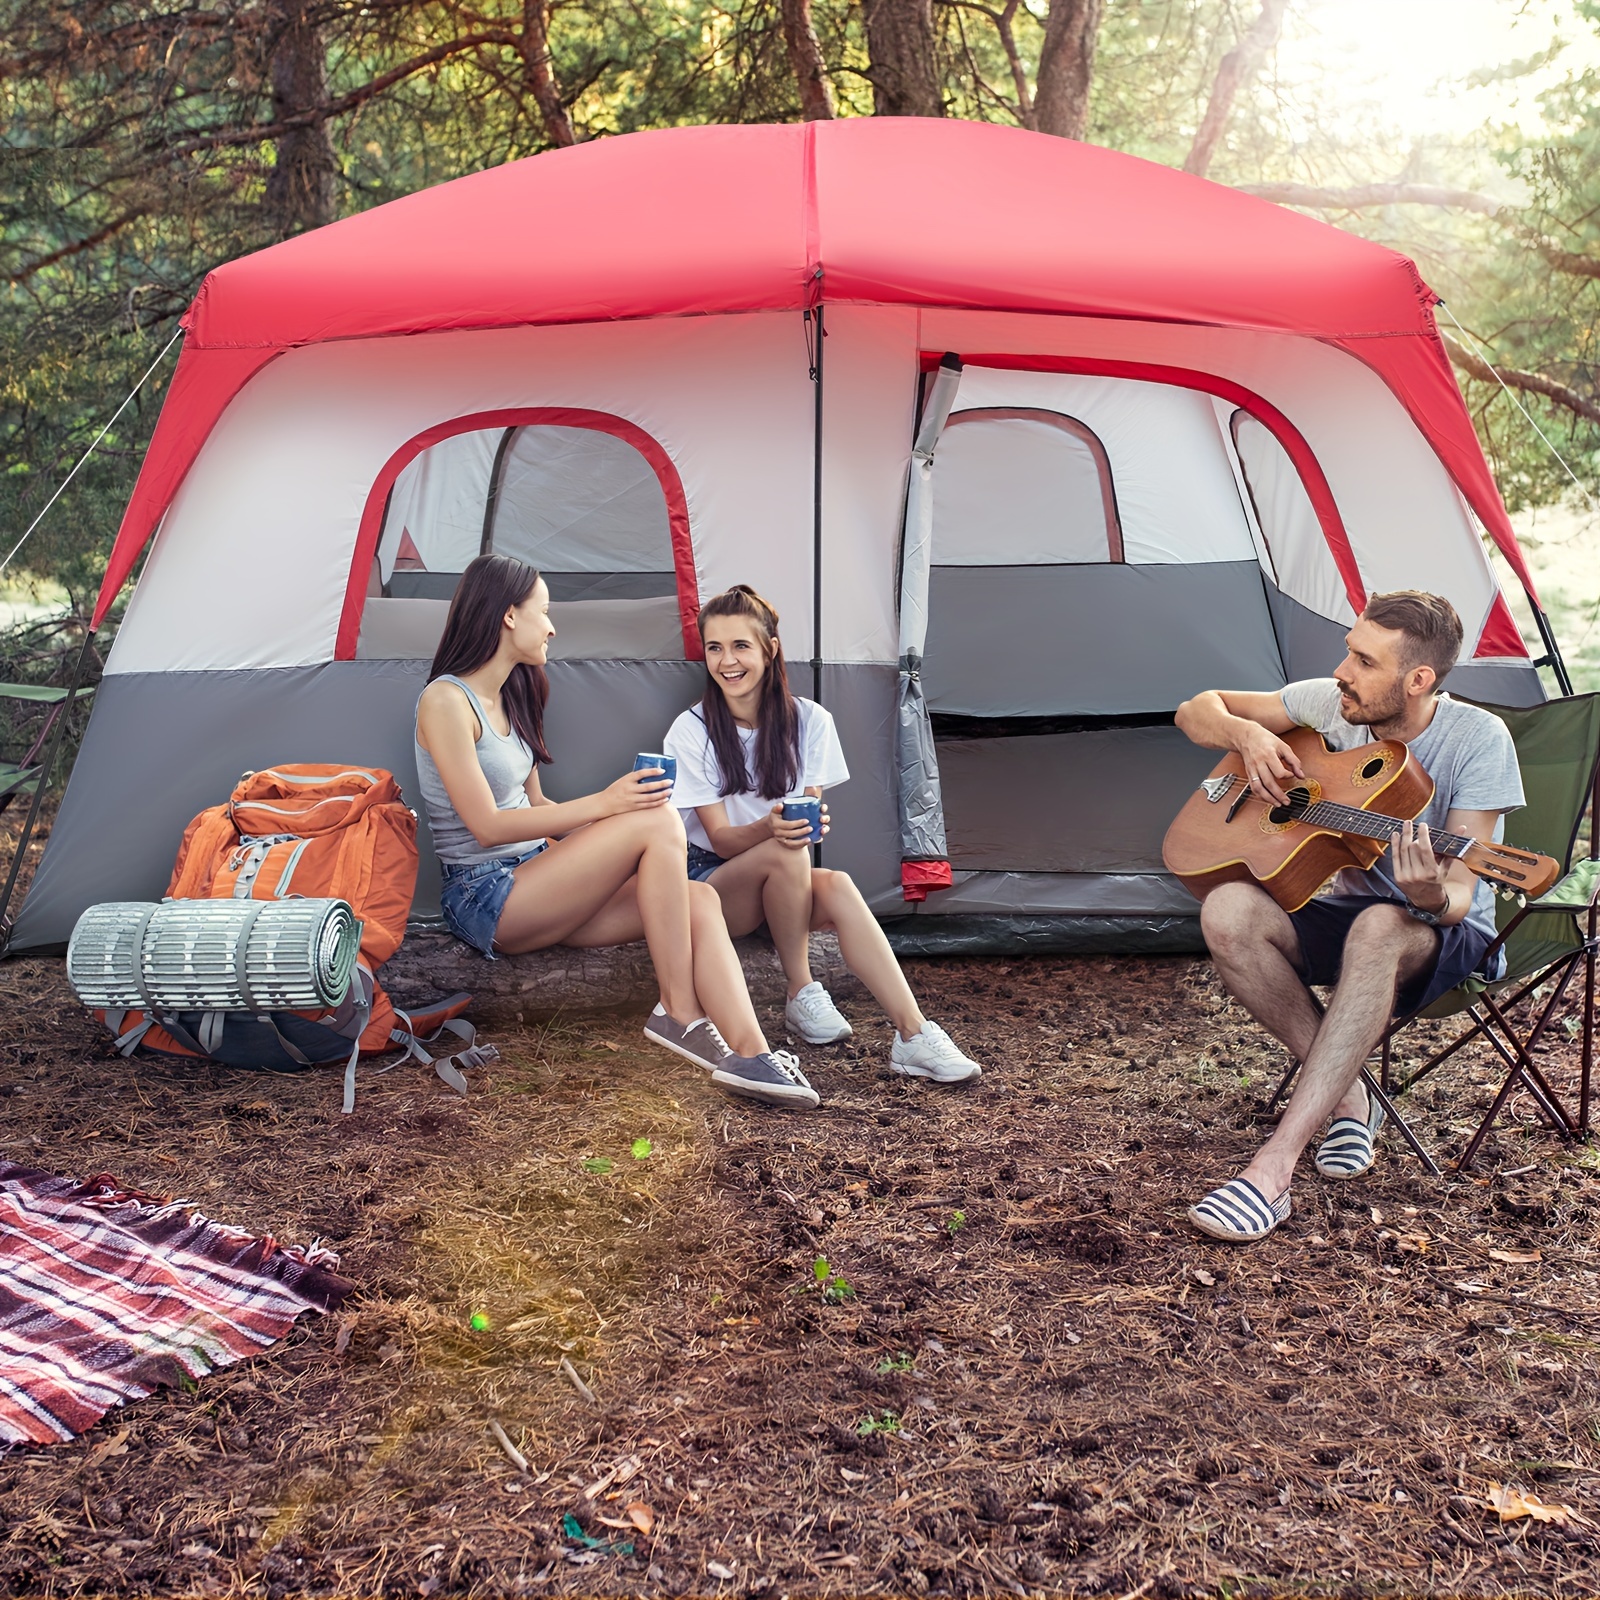 

Polyester Cloth Fiberglass Poles Can Accommodate 14 People Camping Tent, Red And White 430*430*210cm